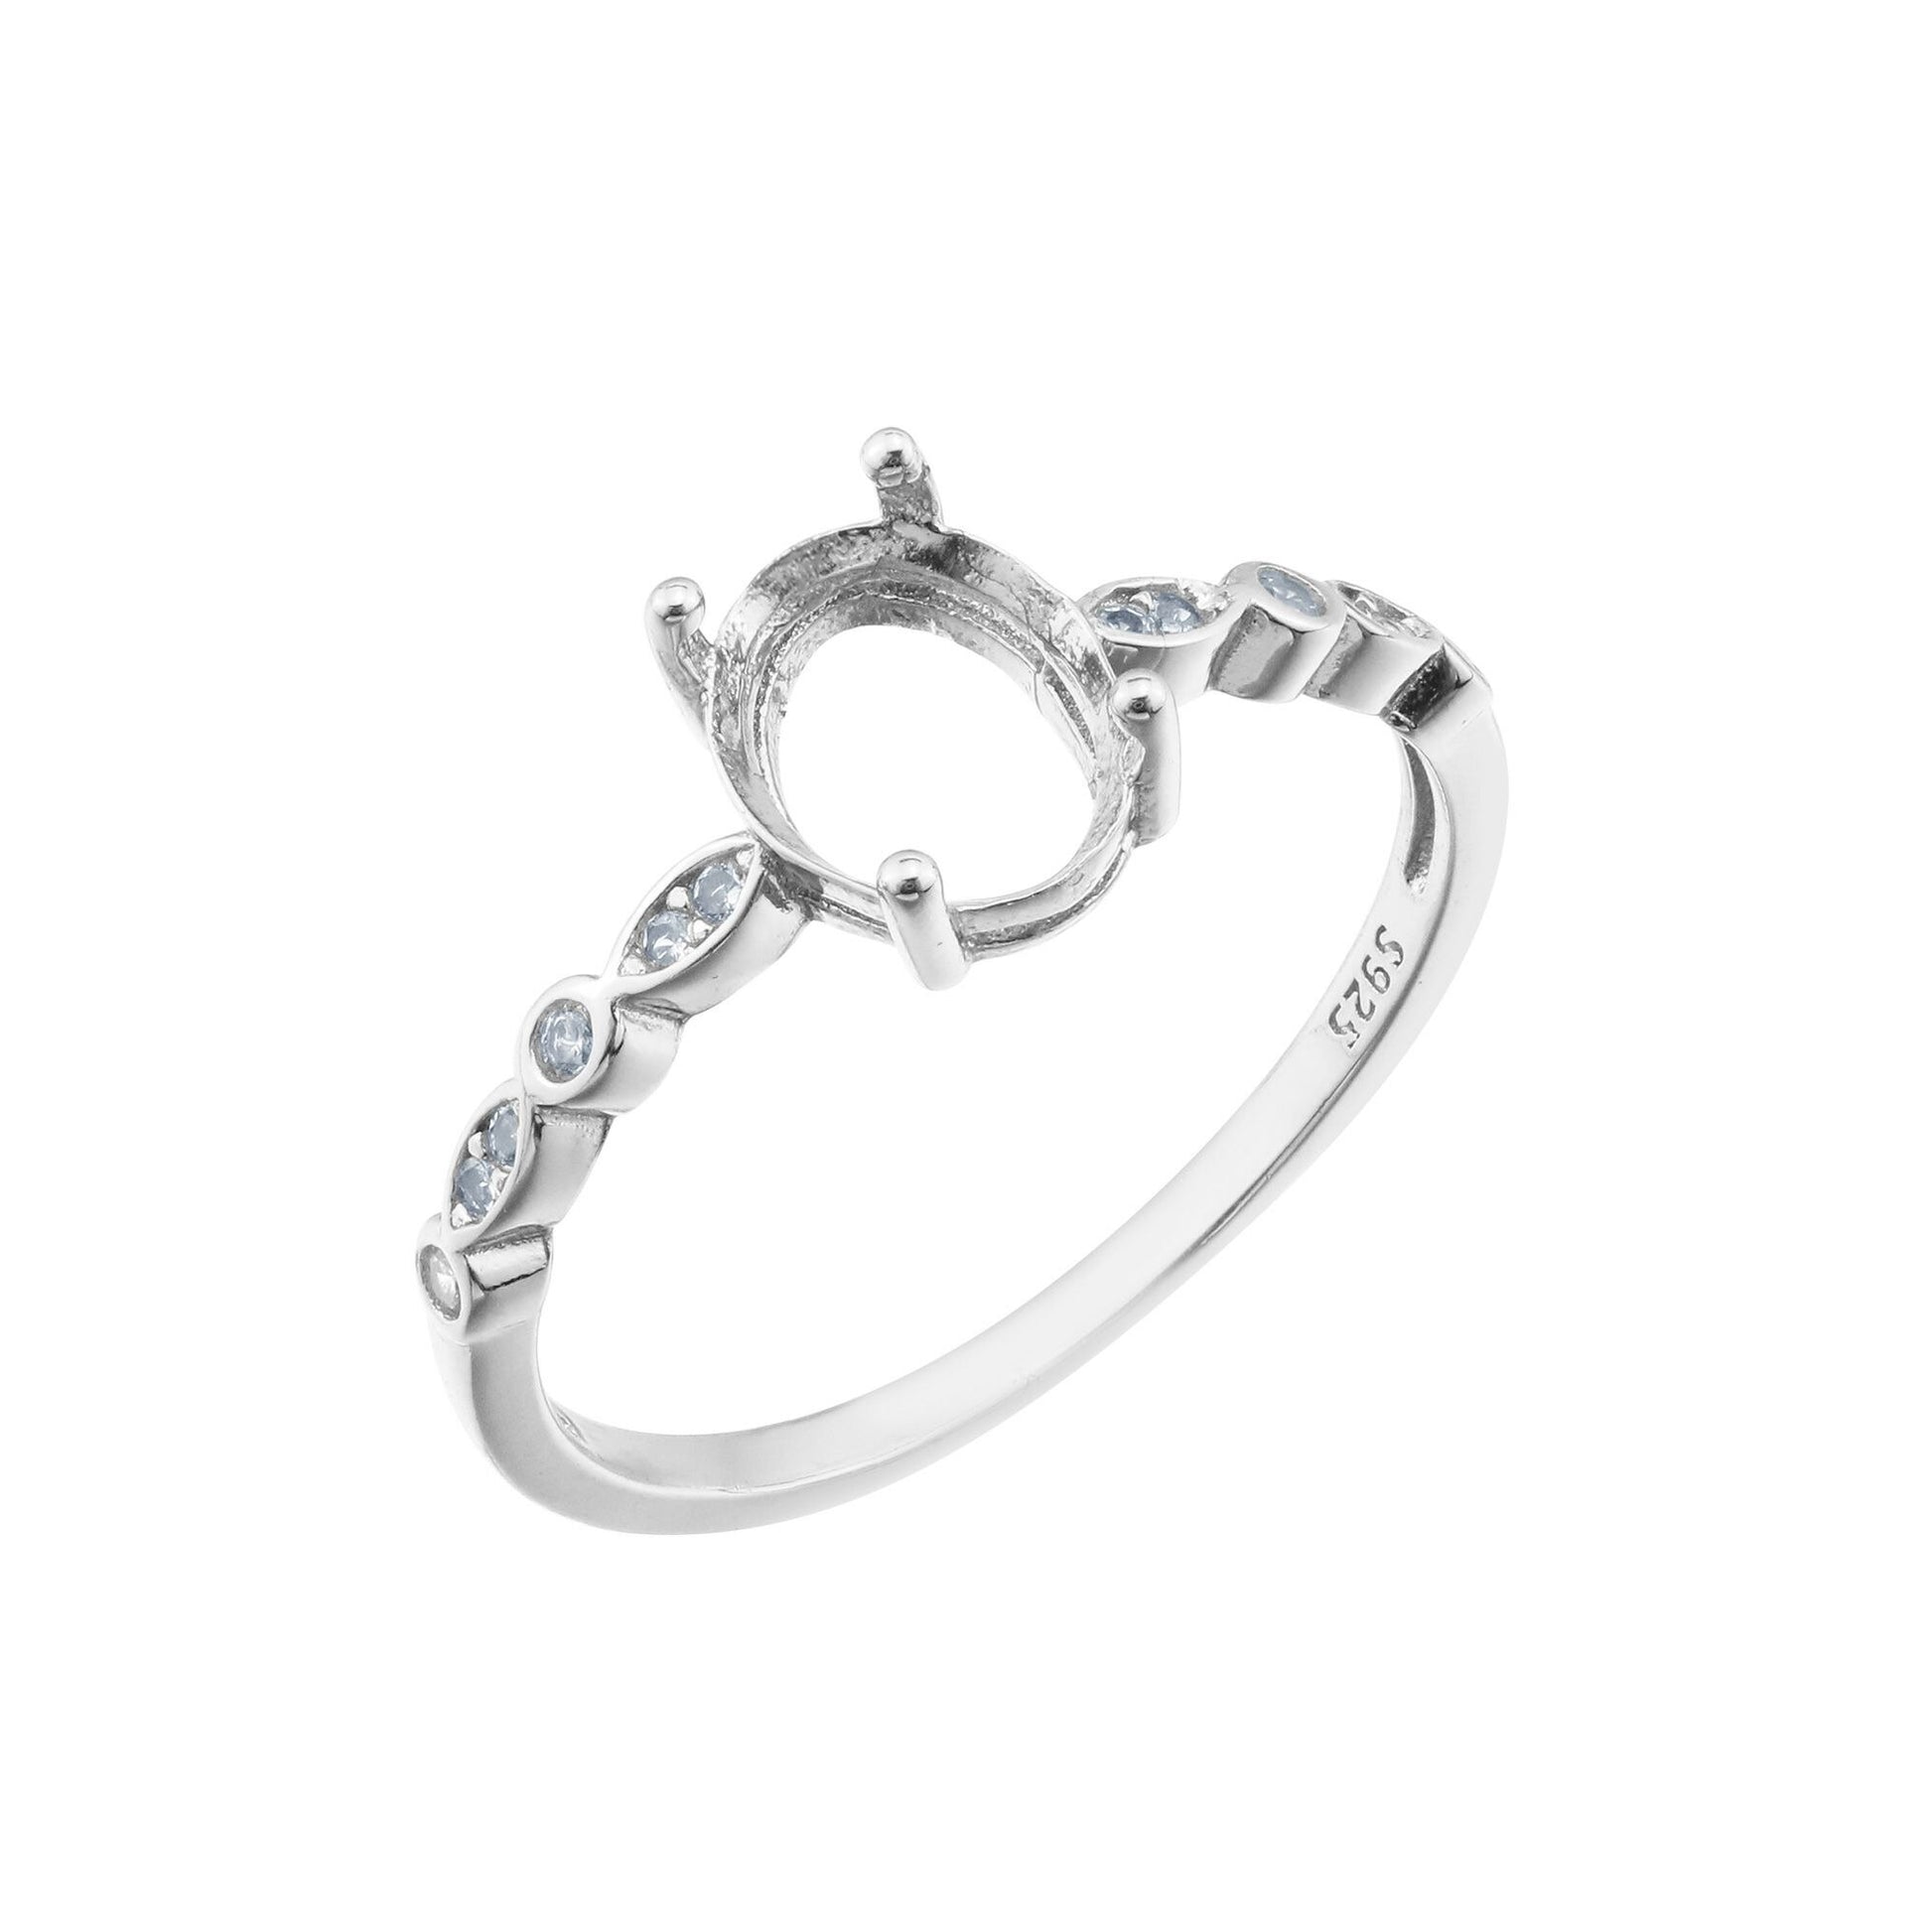 A silver oval art deco vintage setting with alternating bezel marquise and round gems on the sides.